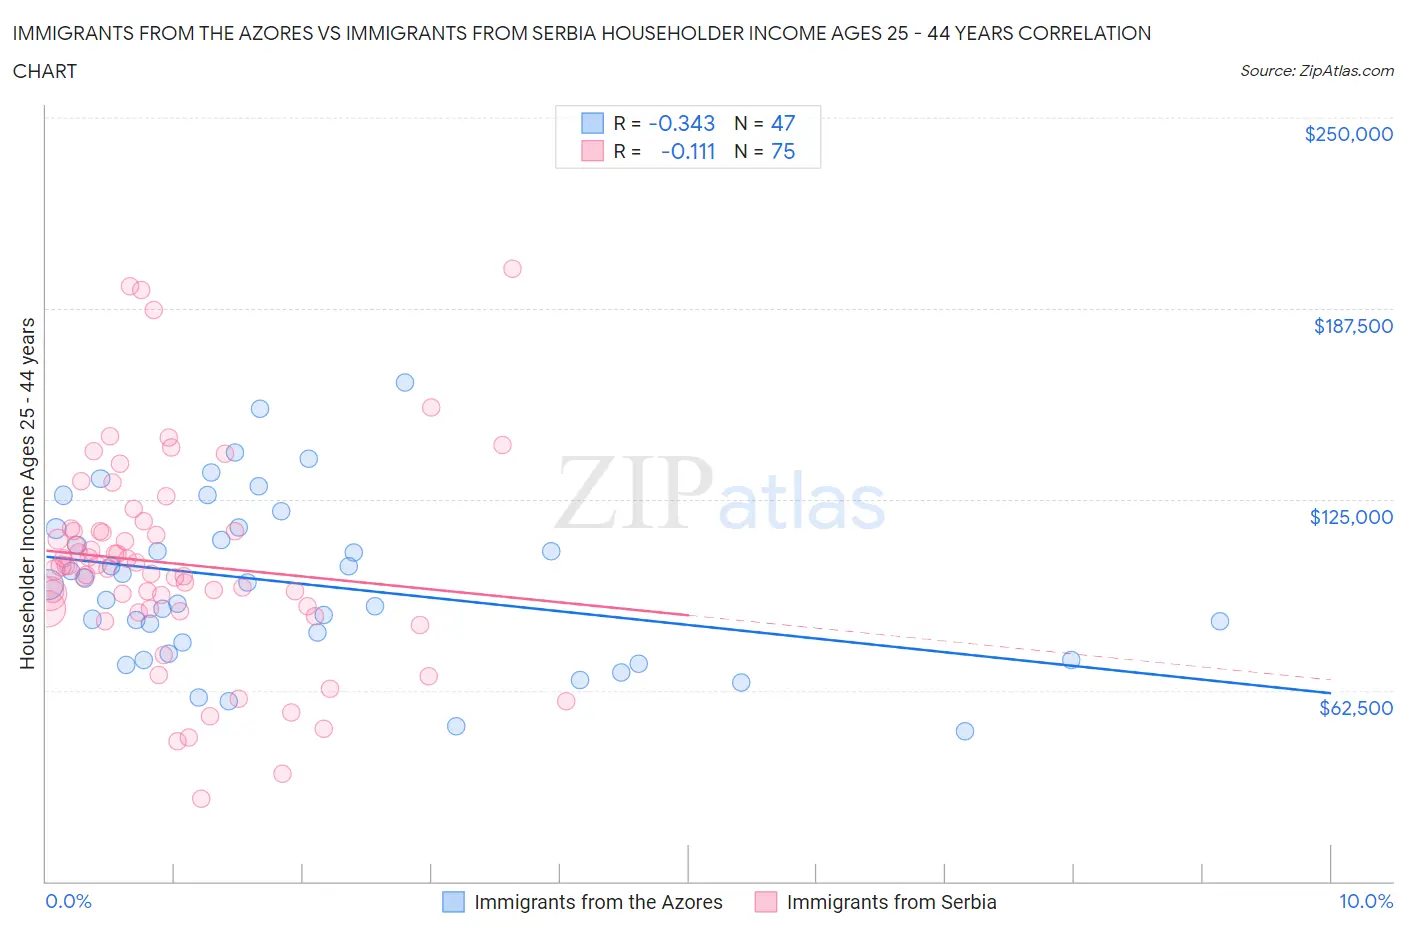 Immigrants from the Azores vs Immigrants from Serbia Householder Income Ages 25 - 44 years